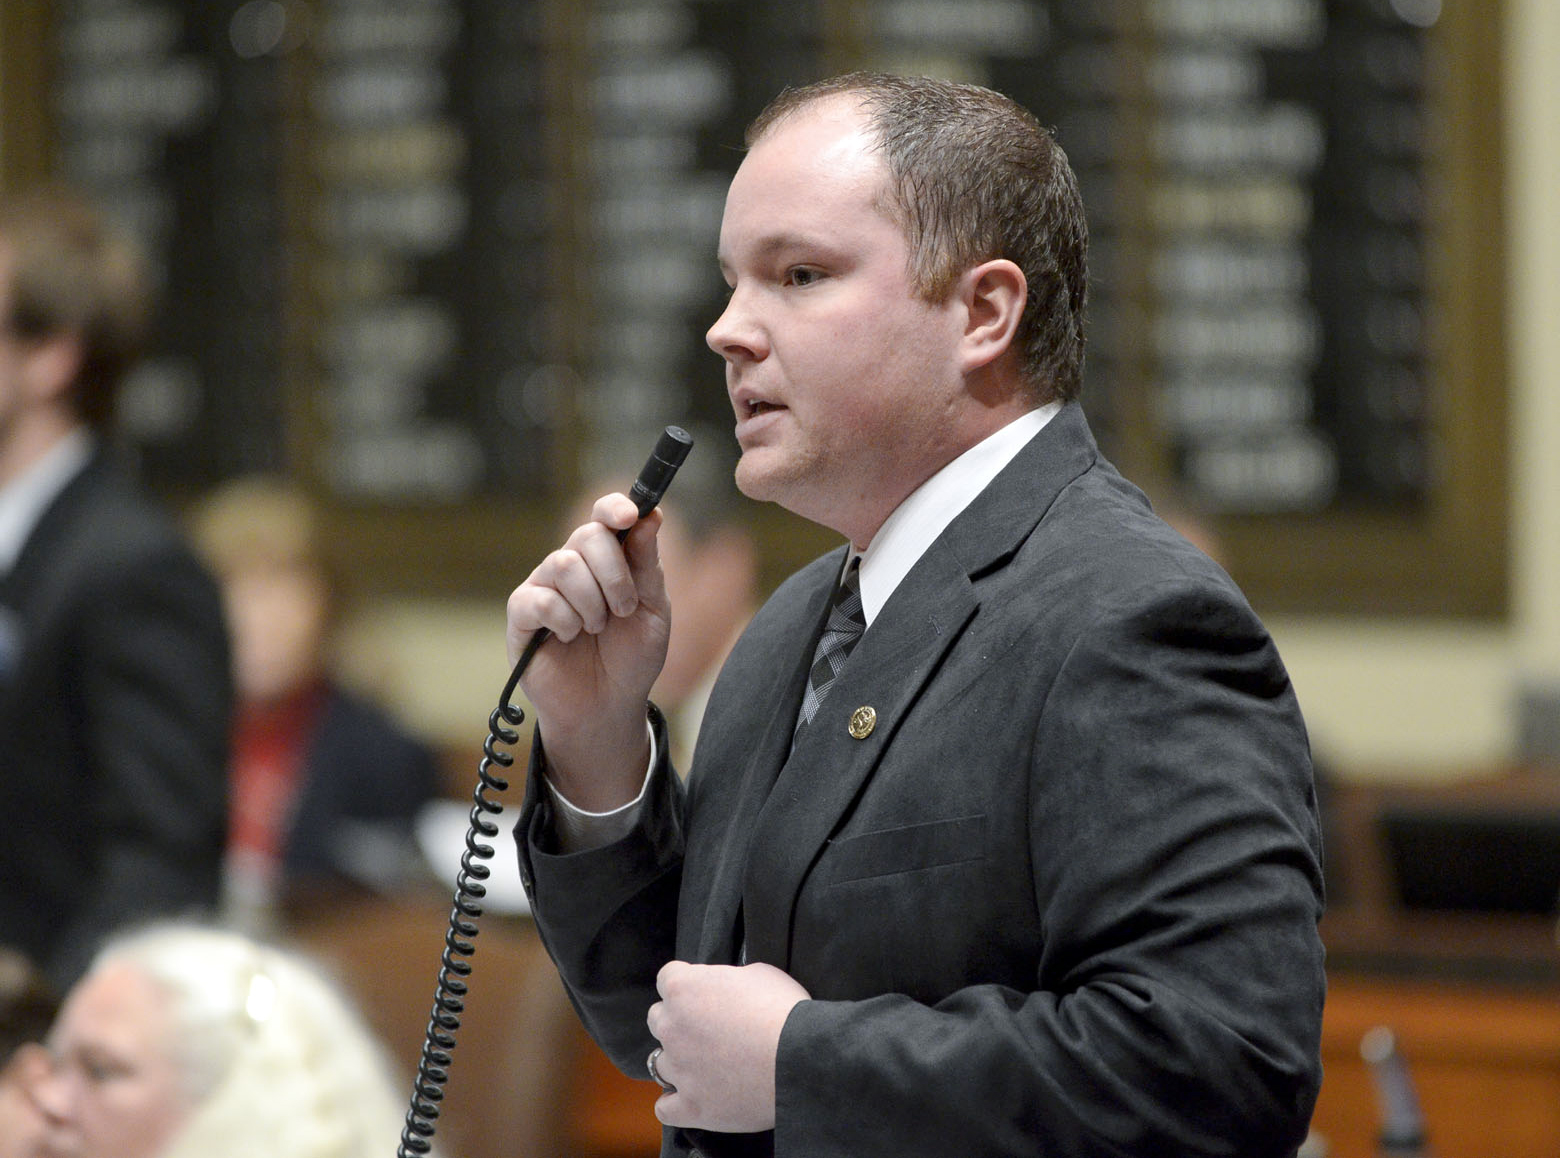 Rep. Branden Petersen says that not running for the Legislature was never an option. (Photo by Andrew VonBank)